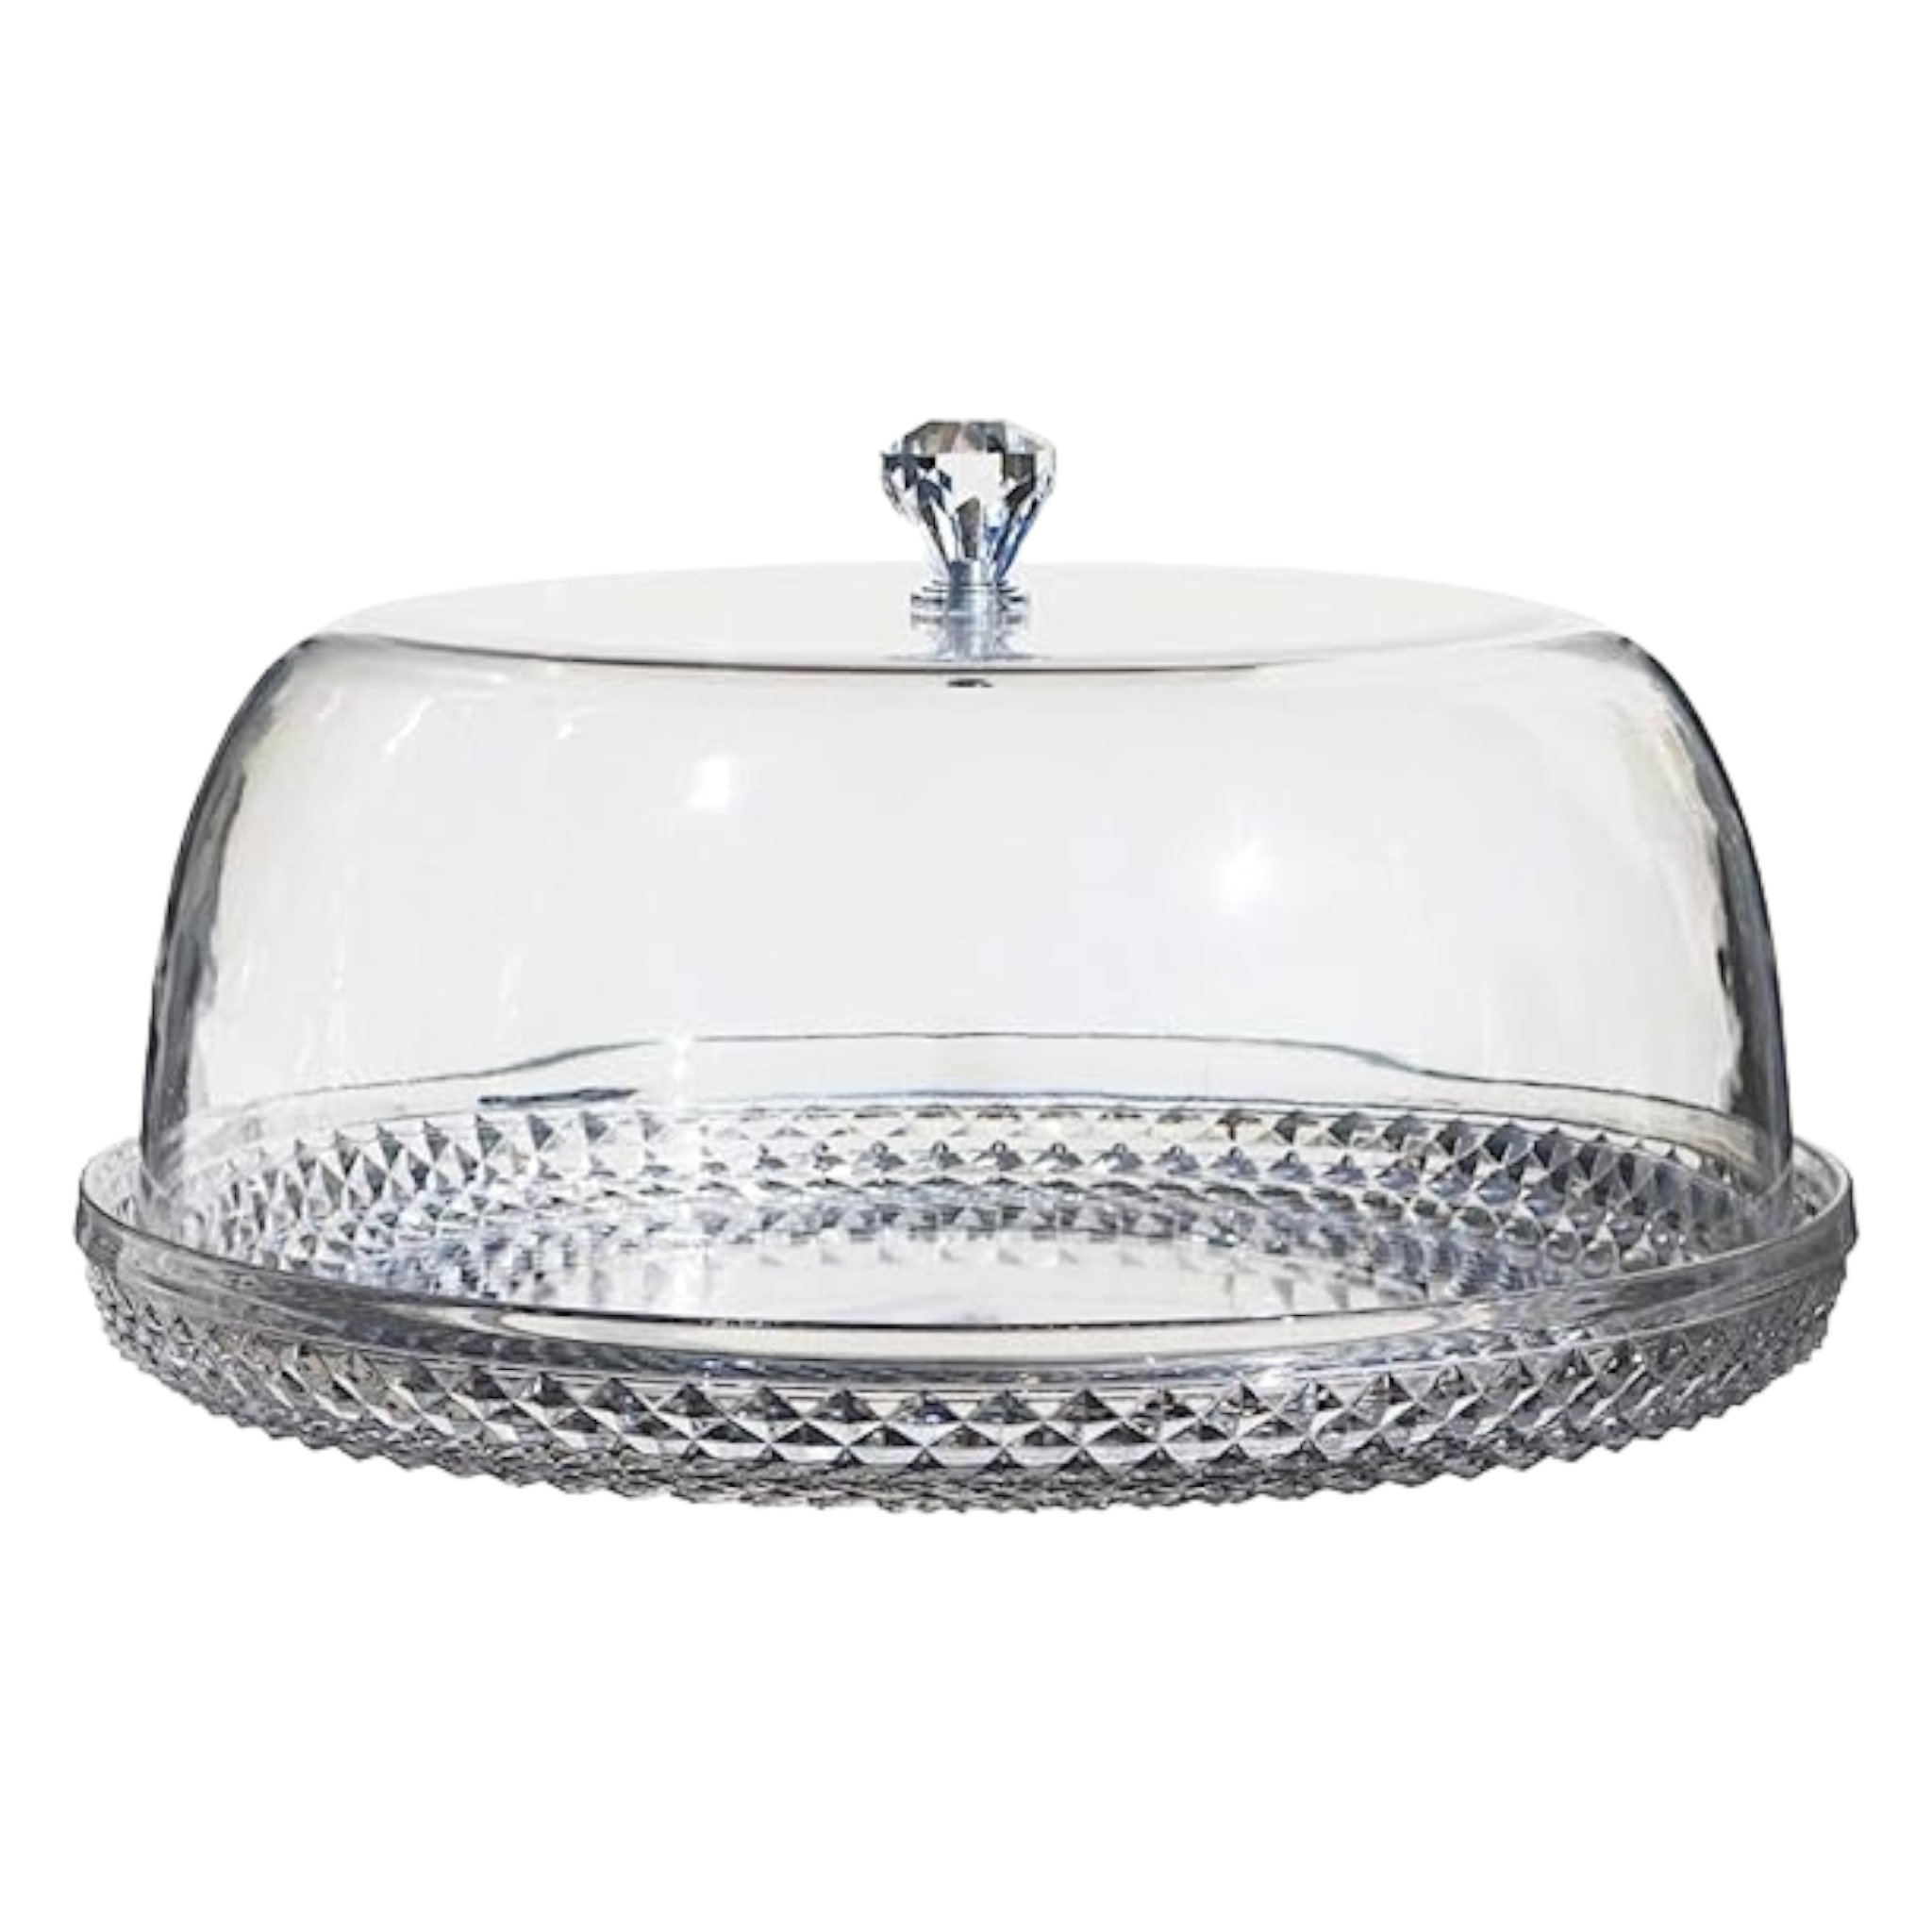 Acrylic Patisserie Cake Server Plate with Dome 33x15cm